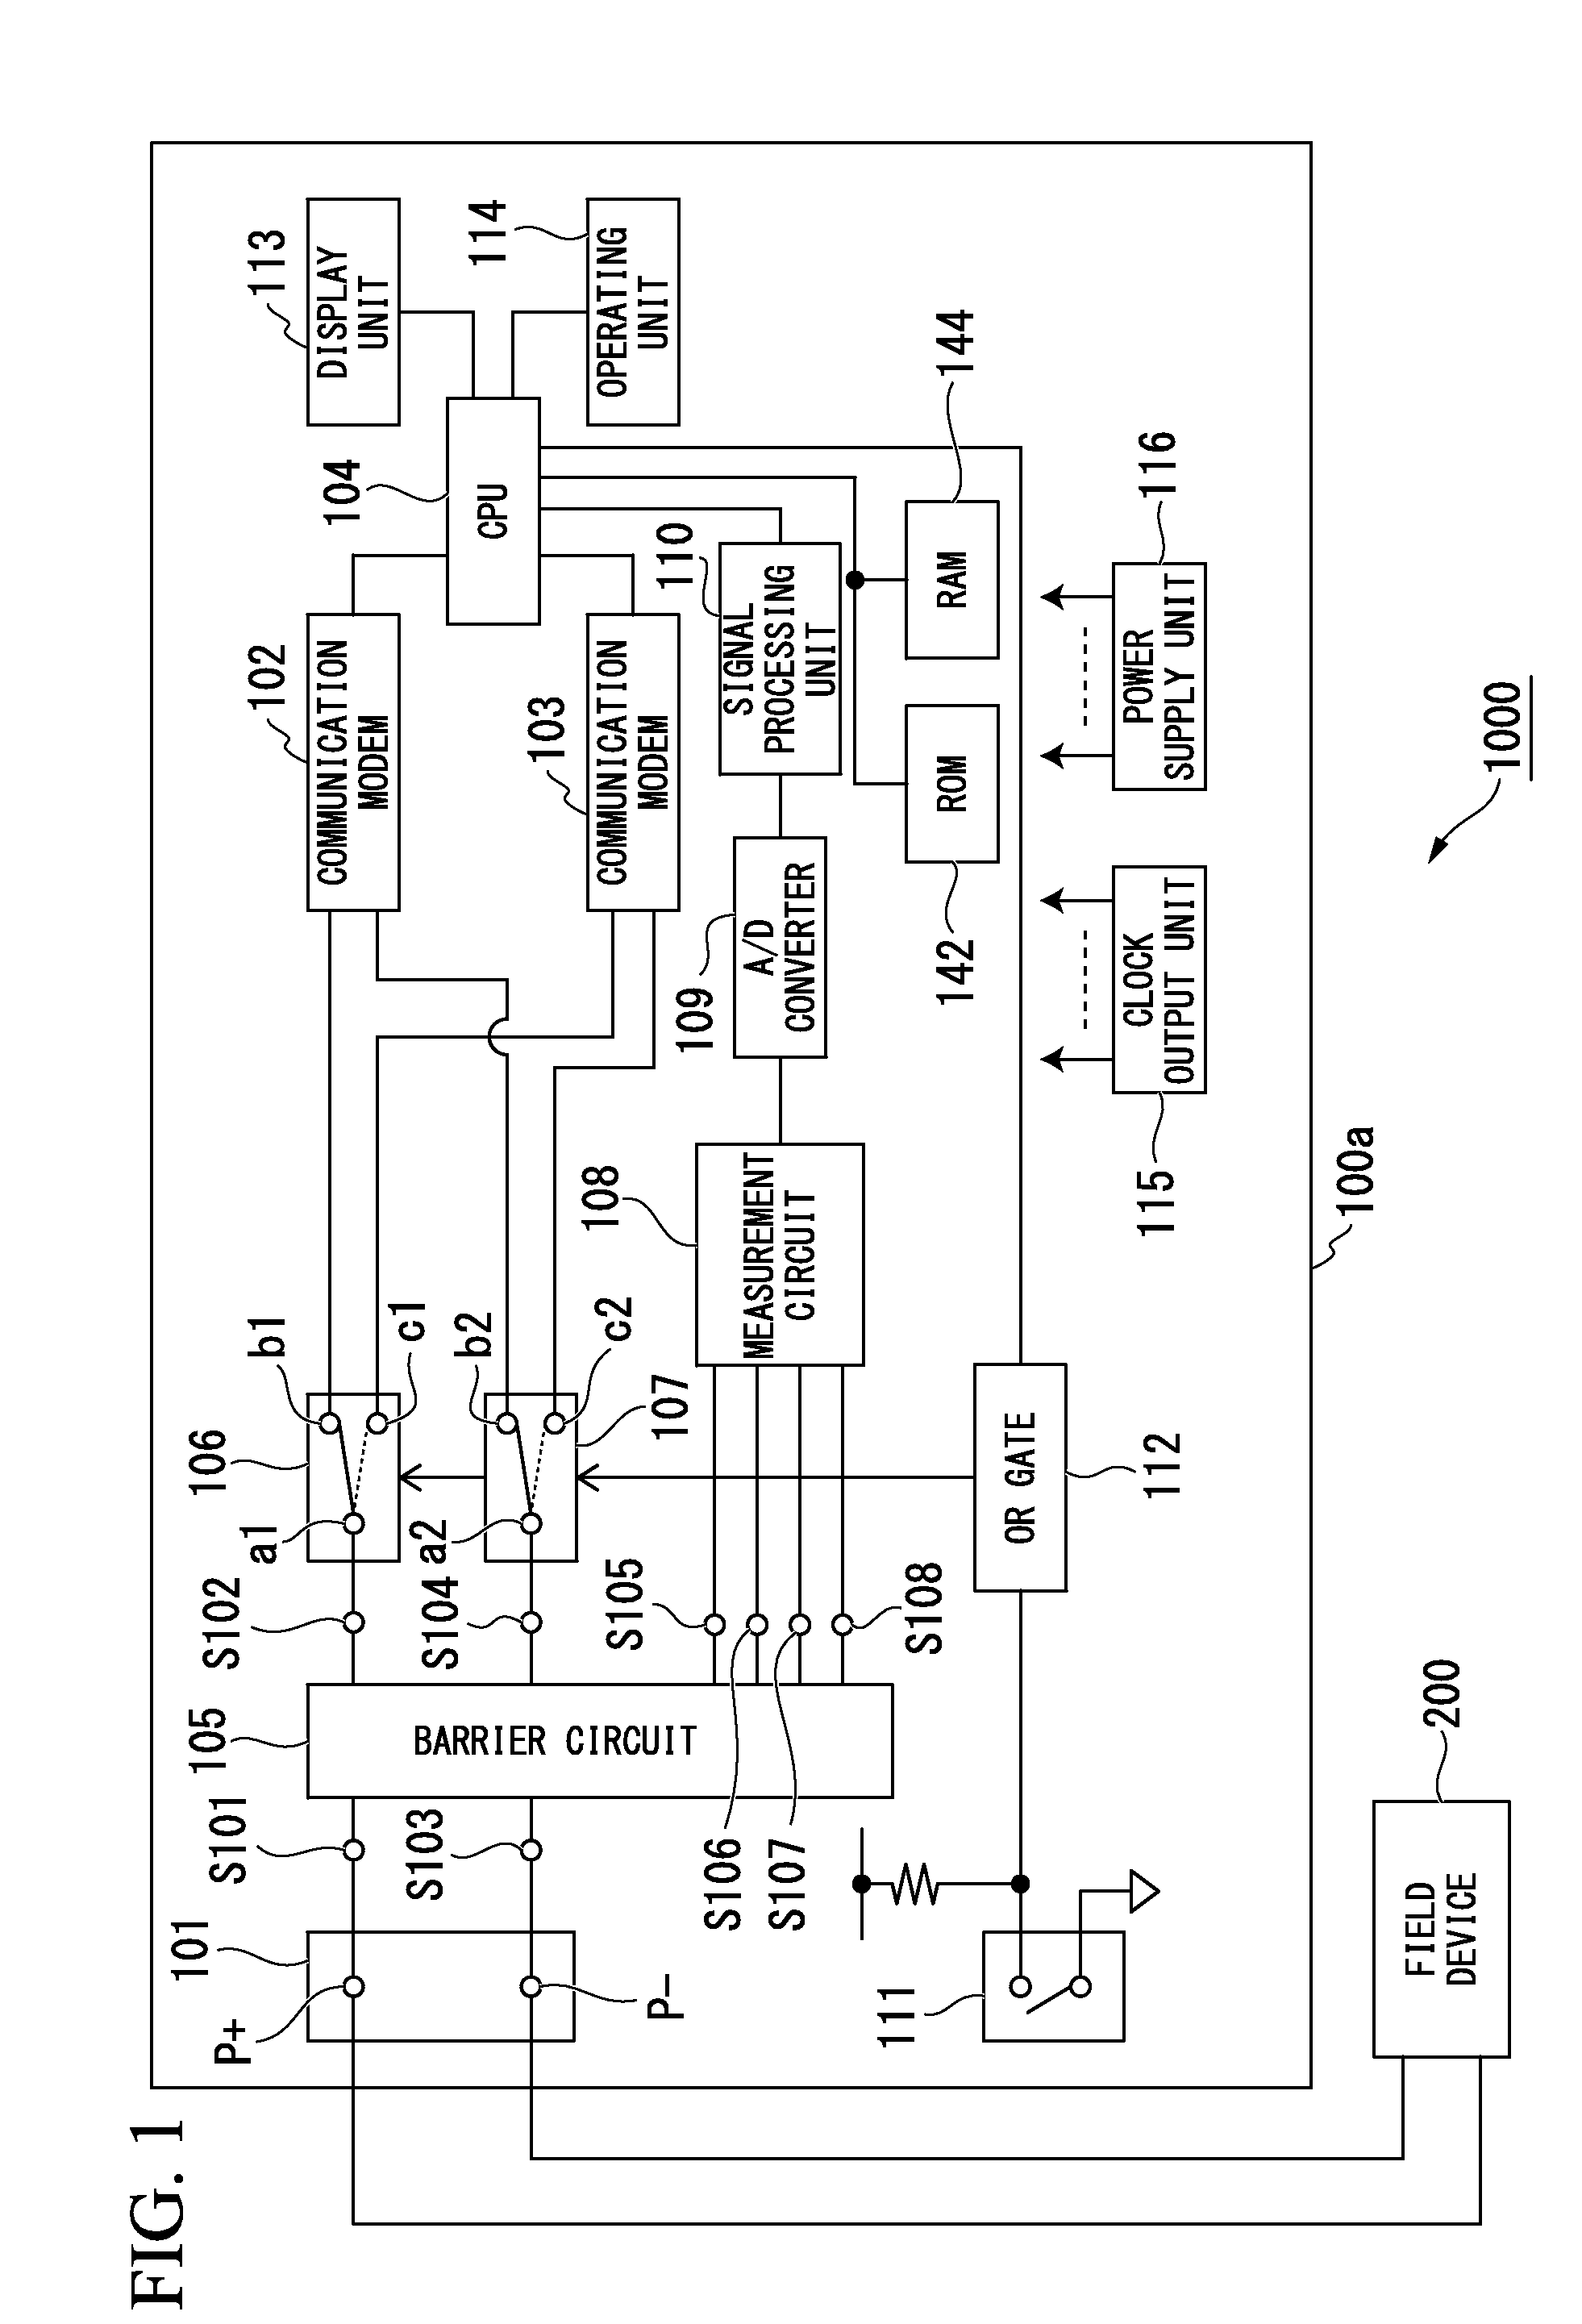 Portable device maintenance support apparatus, system, and method